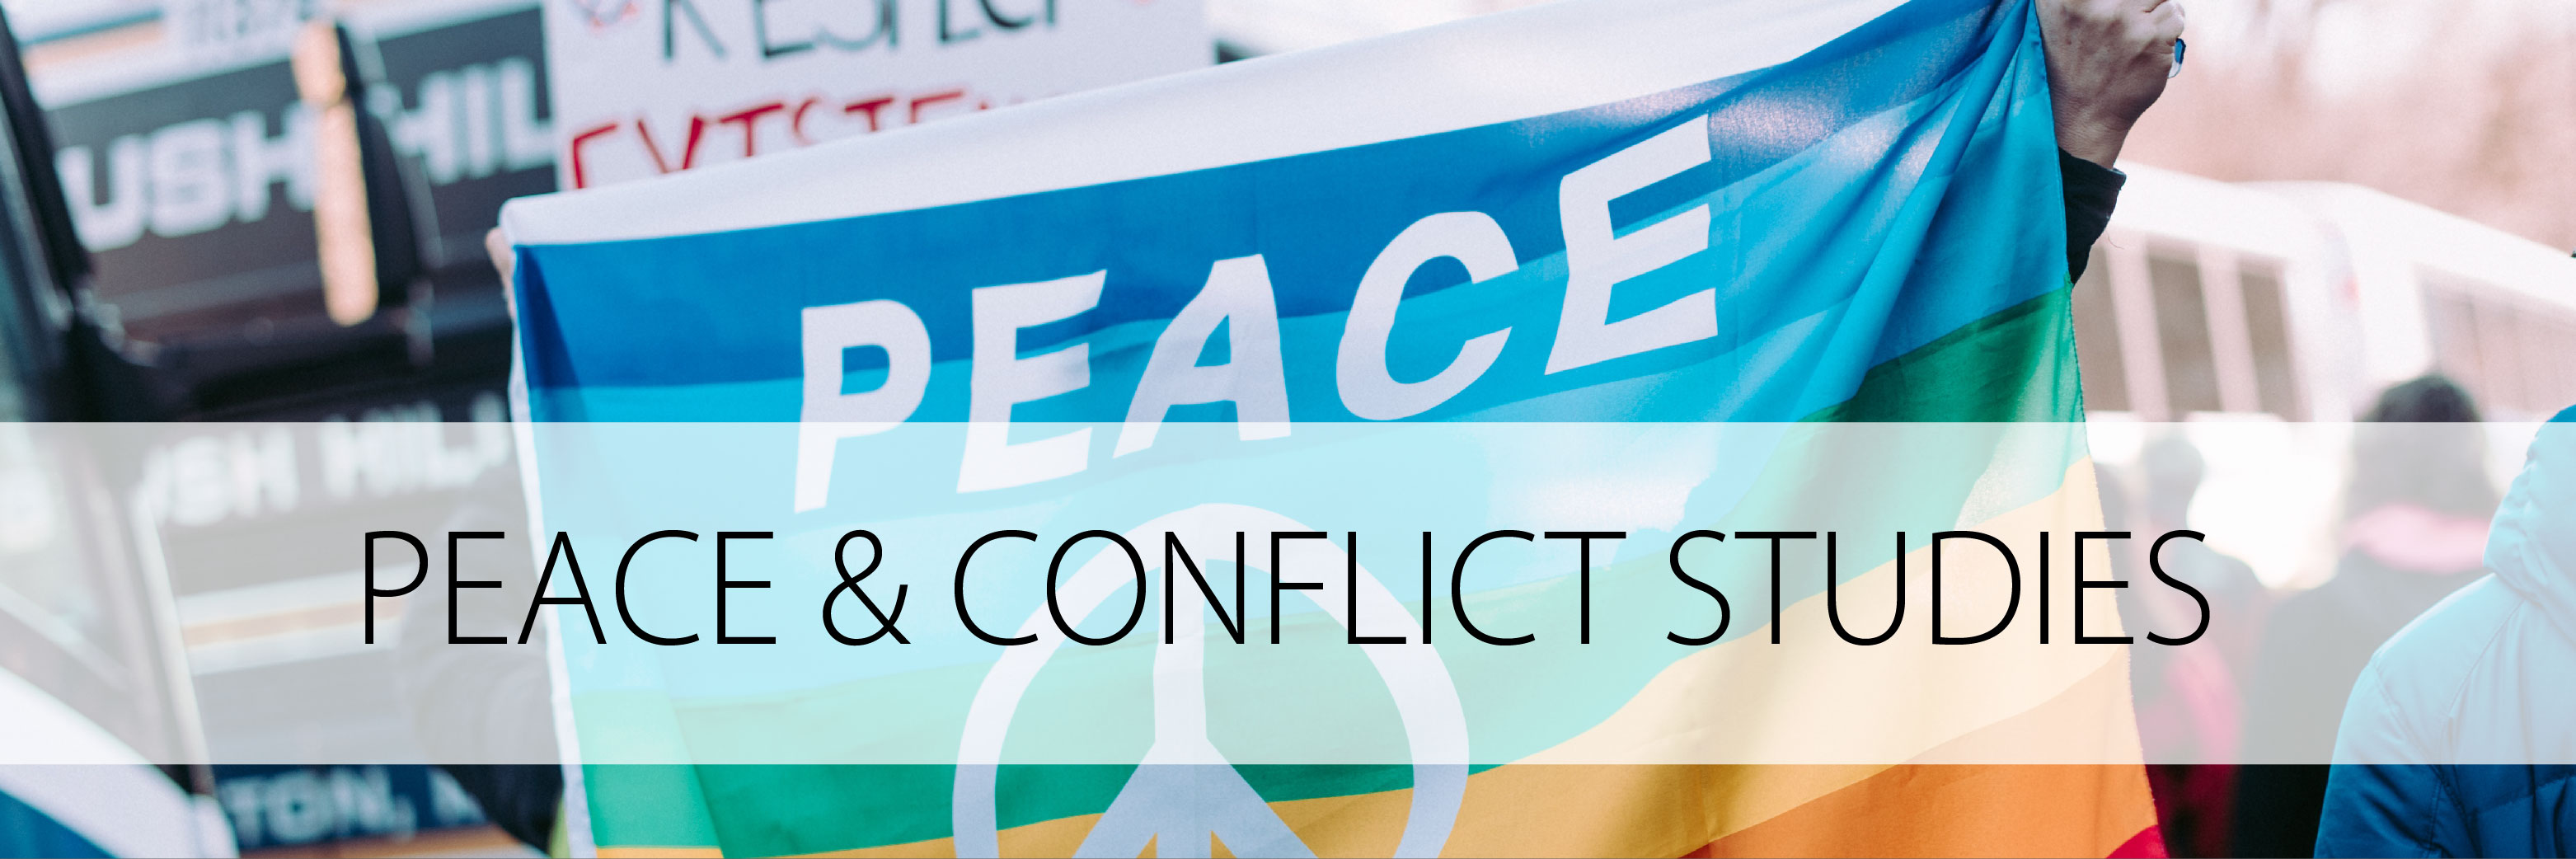 research topics in peace studies and conflict resolution